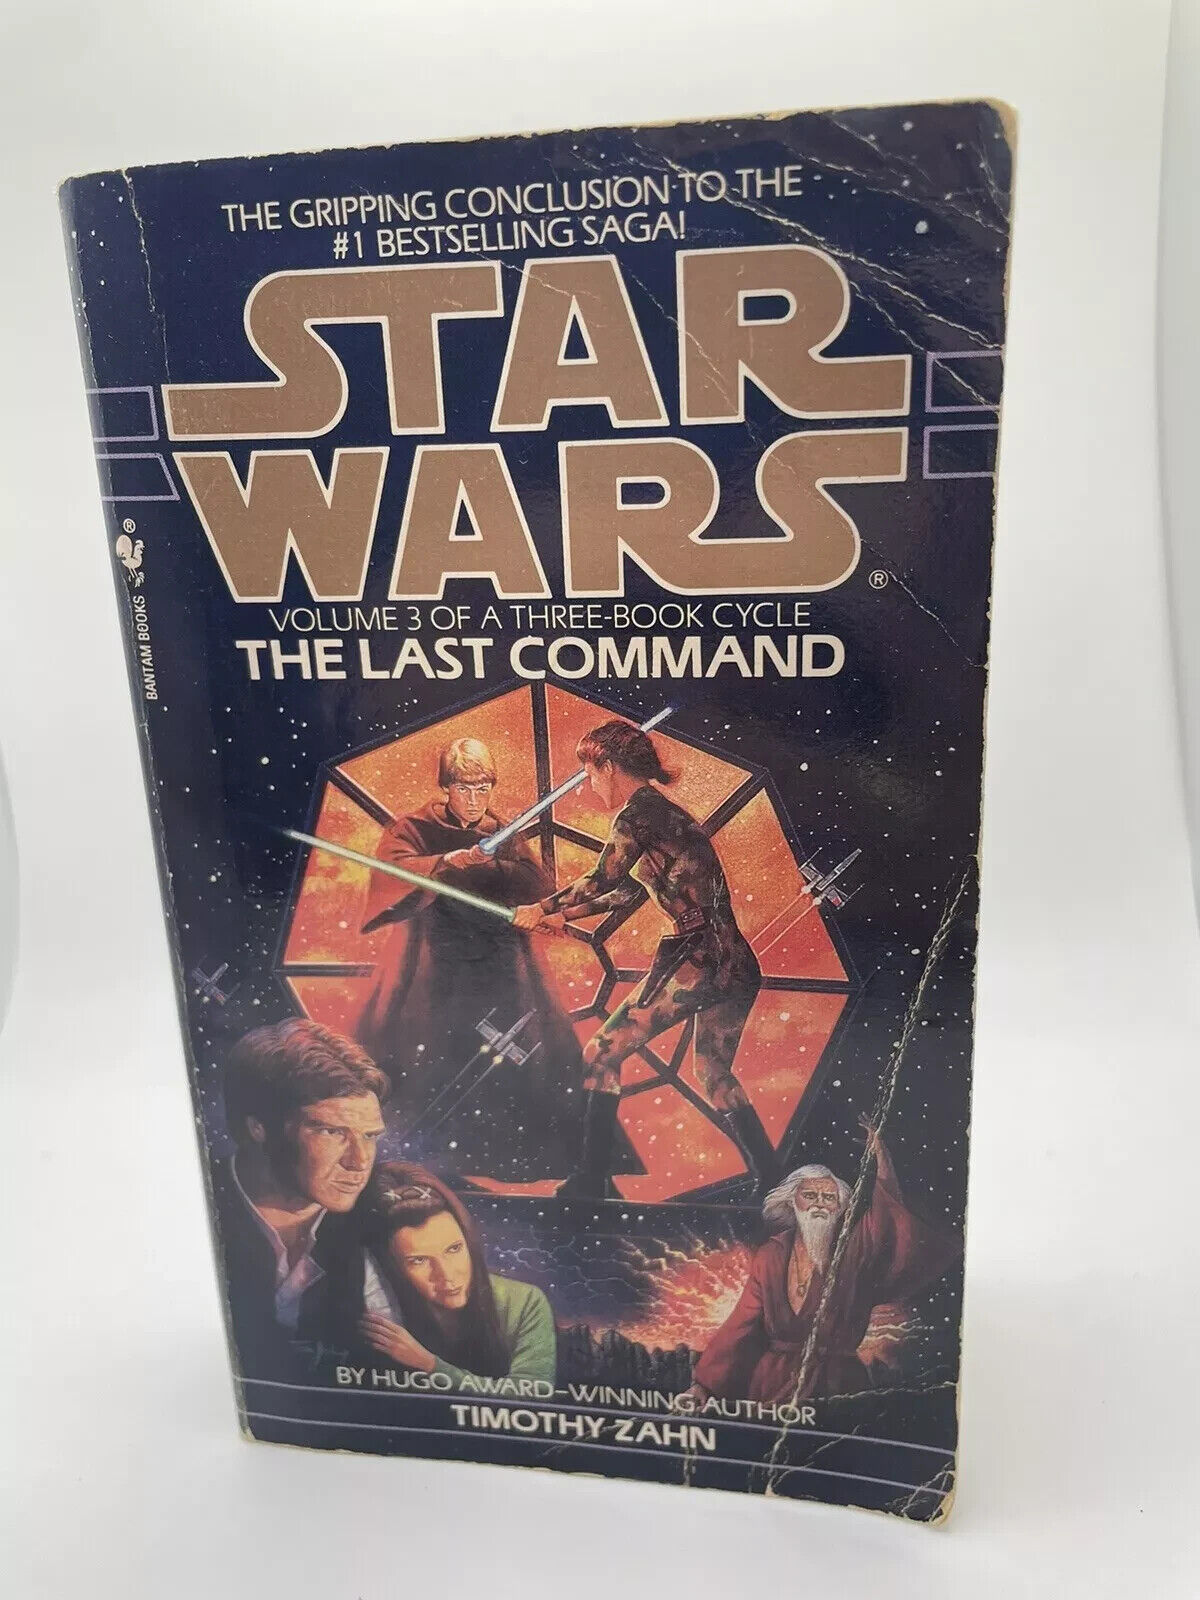 STAR WARS The Last Command Volume 3 by Timothy Zahn 1994 Paperback